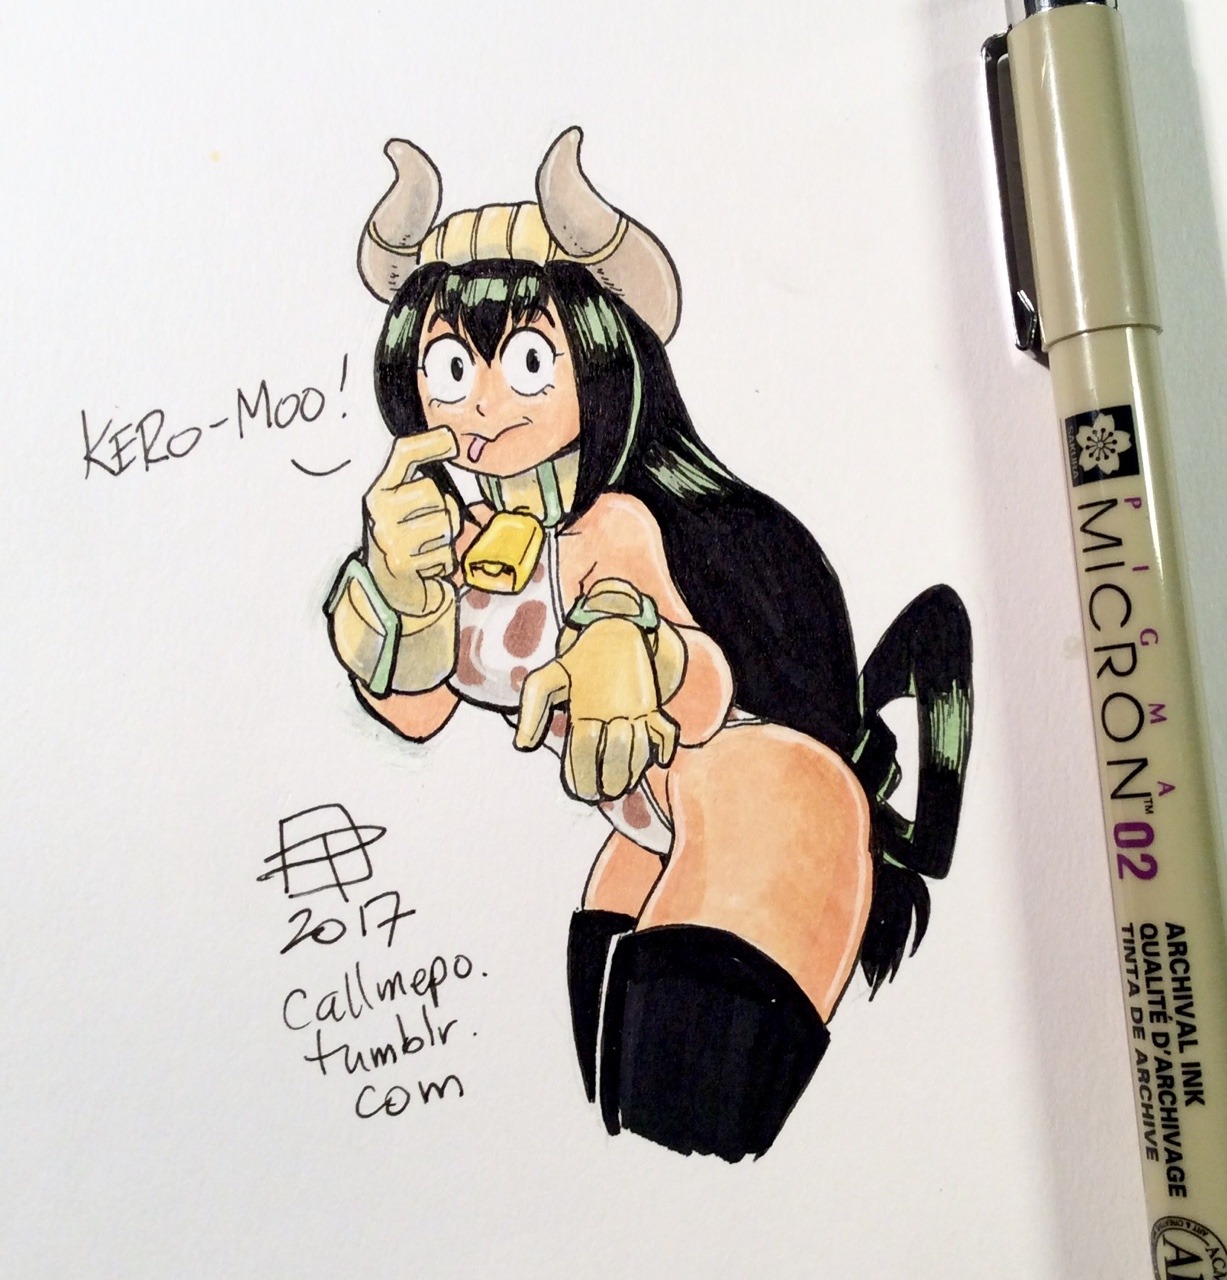 dacommissioner2k15:  callmepo:  Froppy Cowbell!  Her hero costume provided the inspiration.